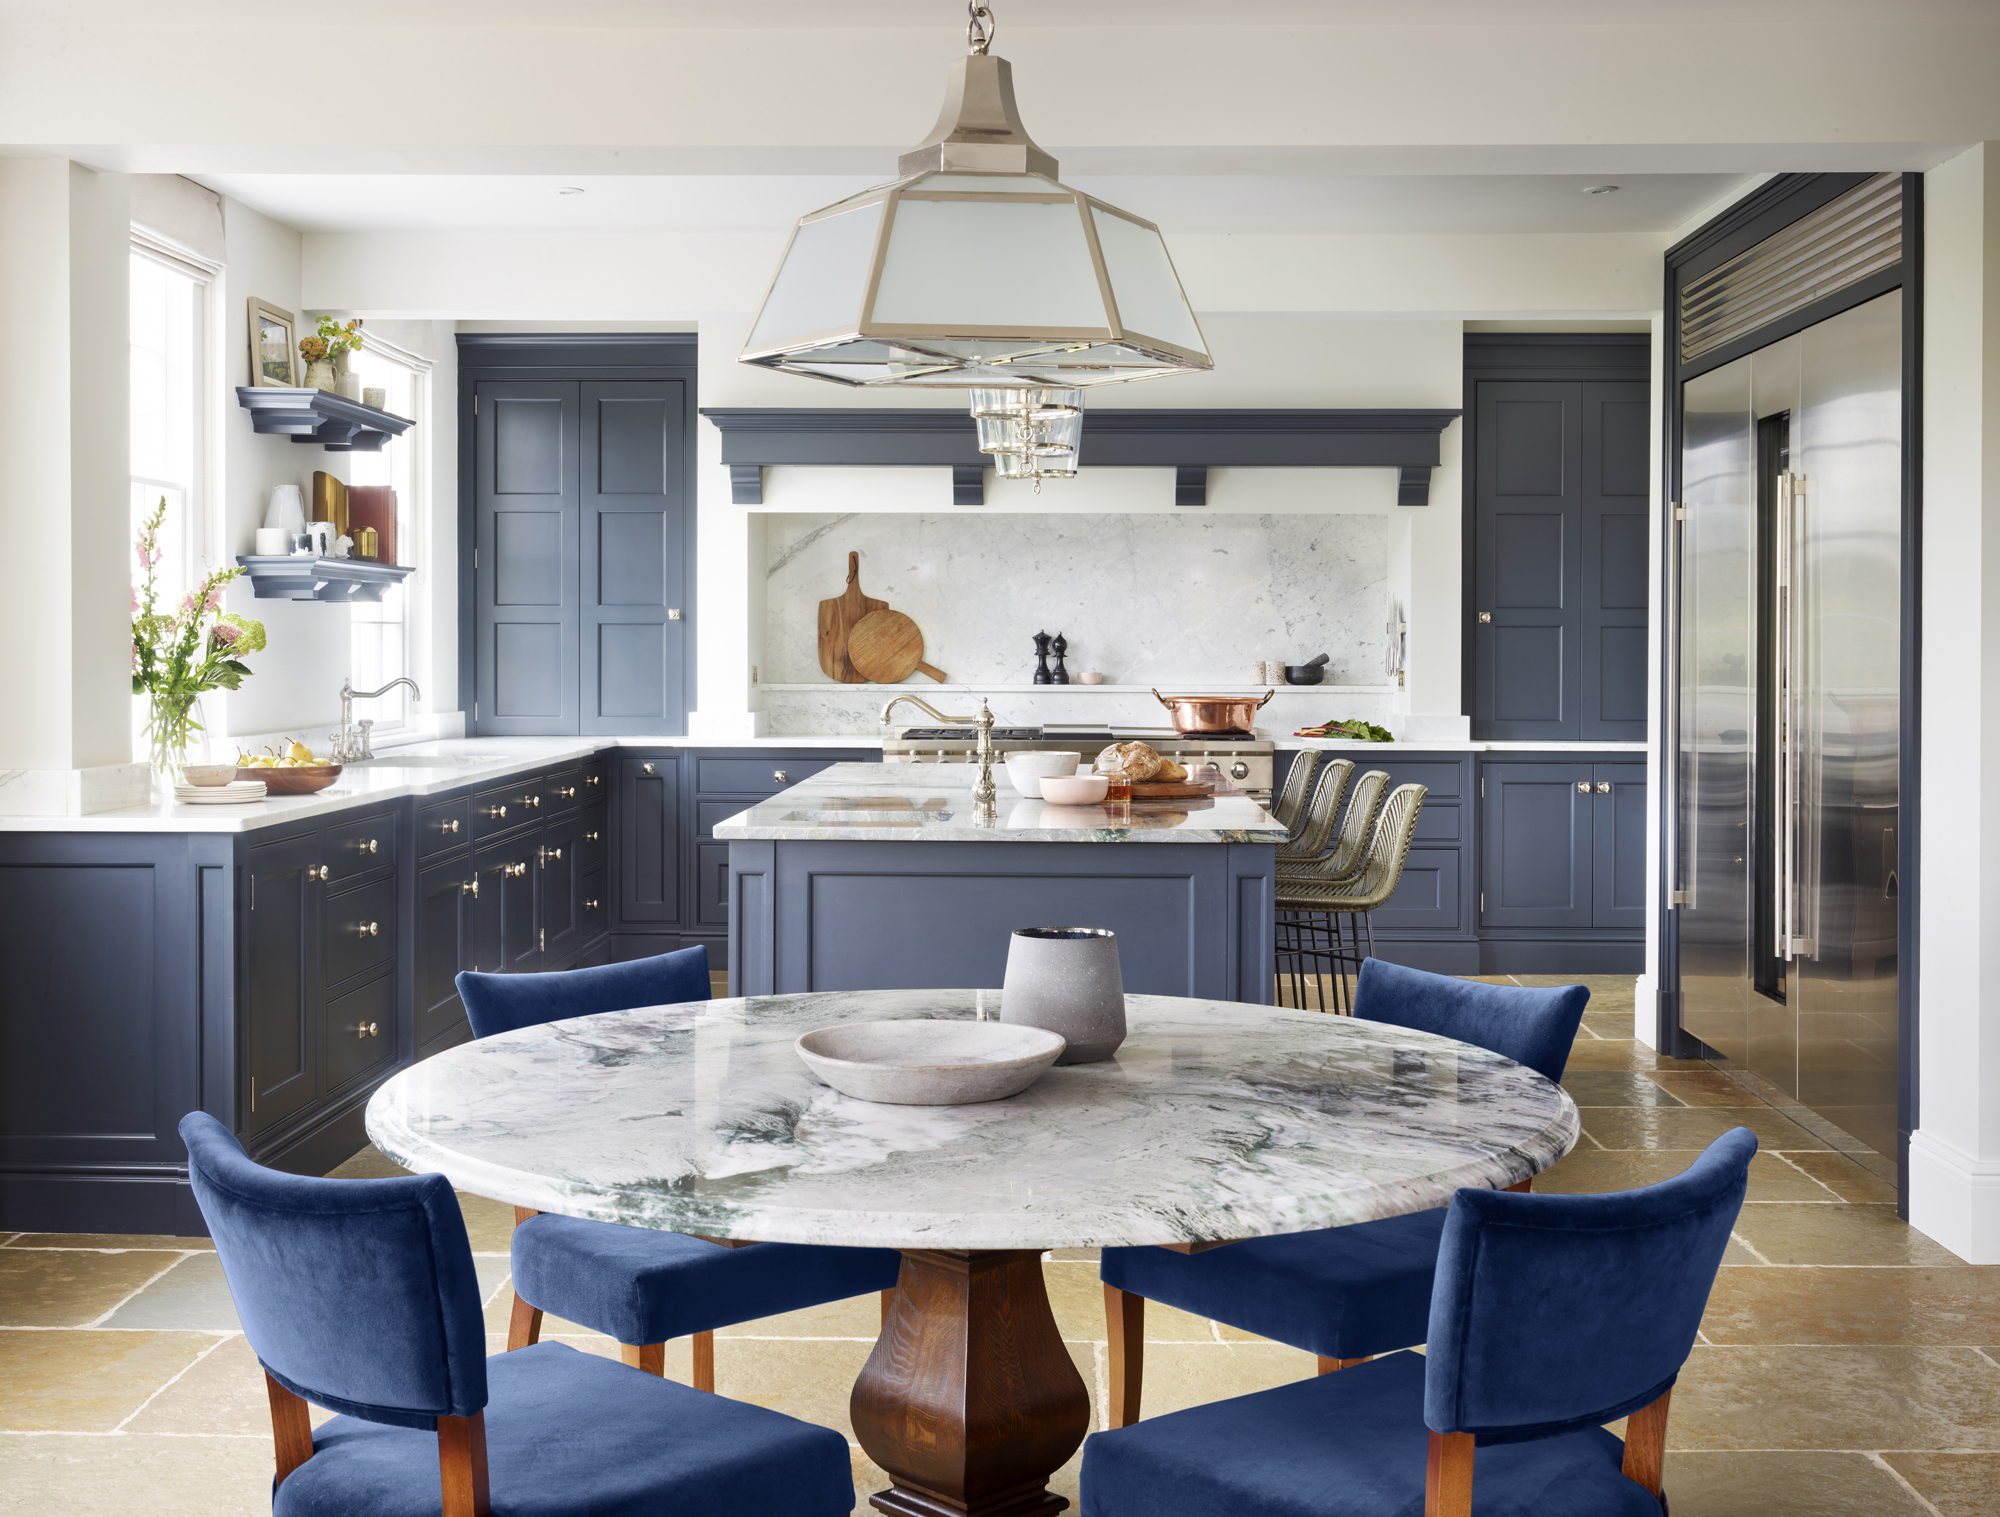 bespoke kitchens: a guide to completely custom designs | homebuilding